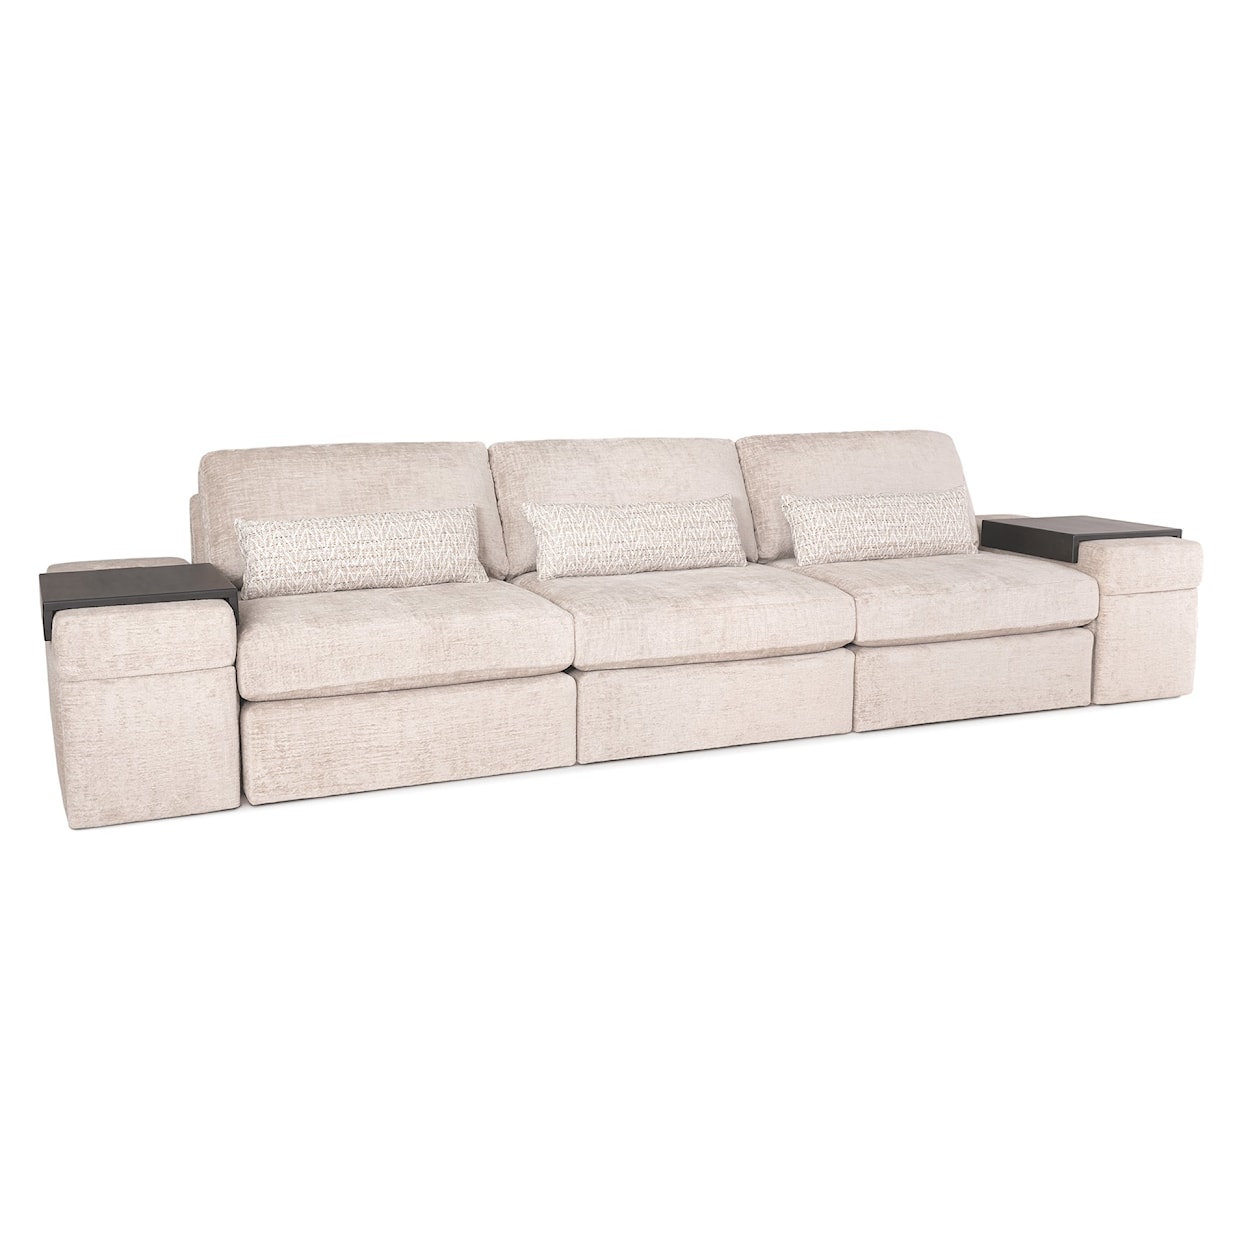 Smith Brothers 209 Wide Track Sofa